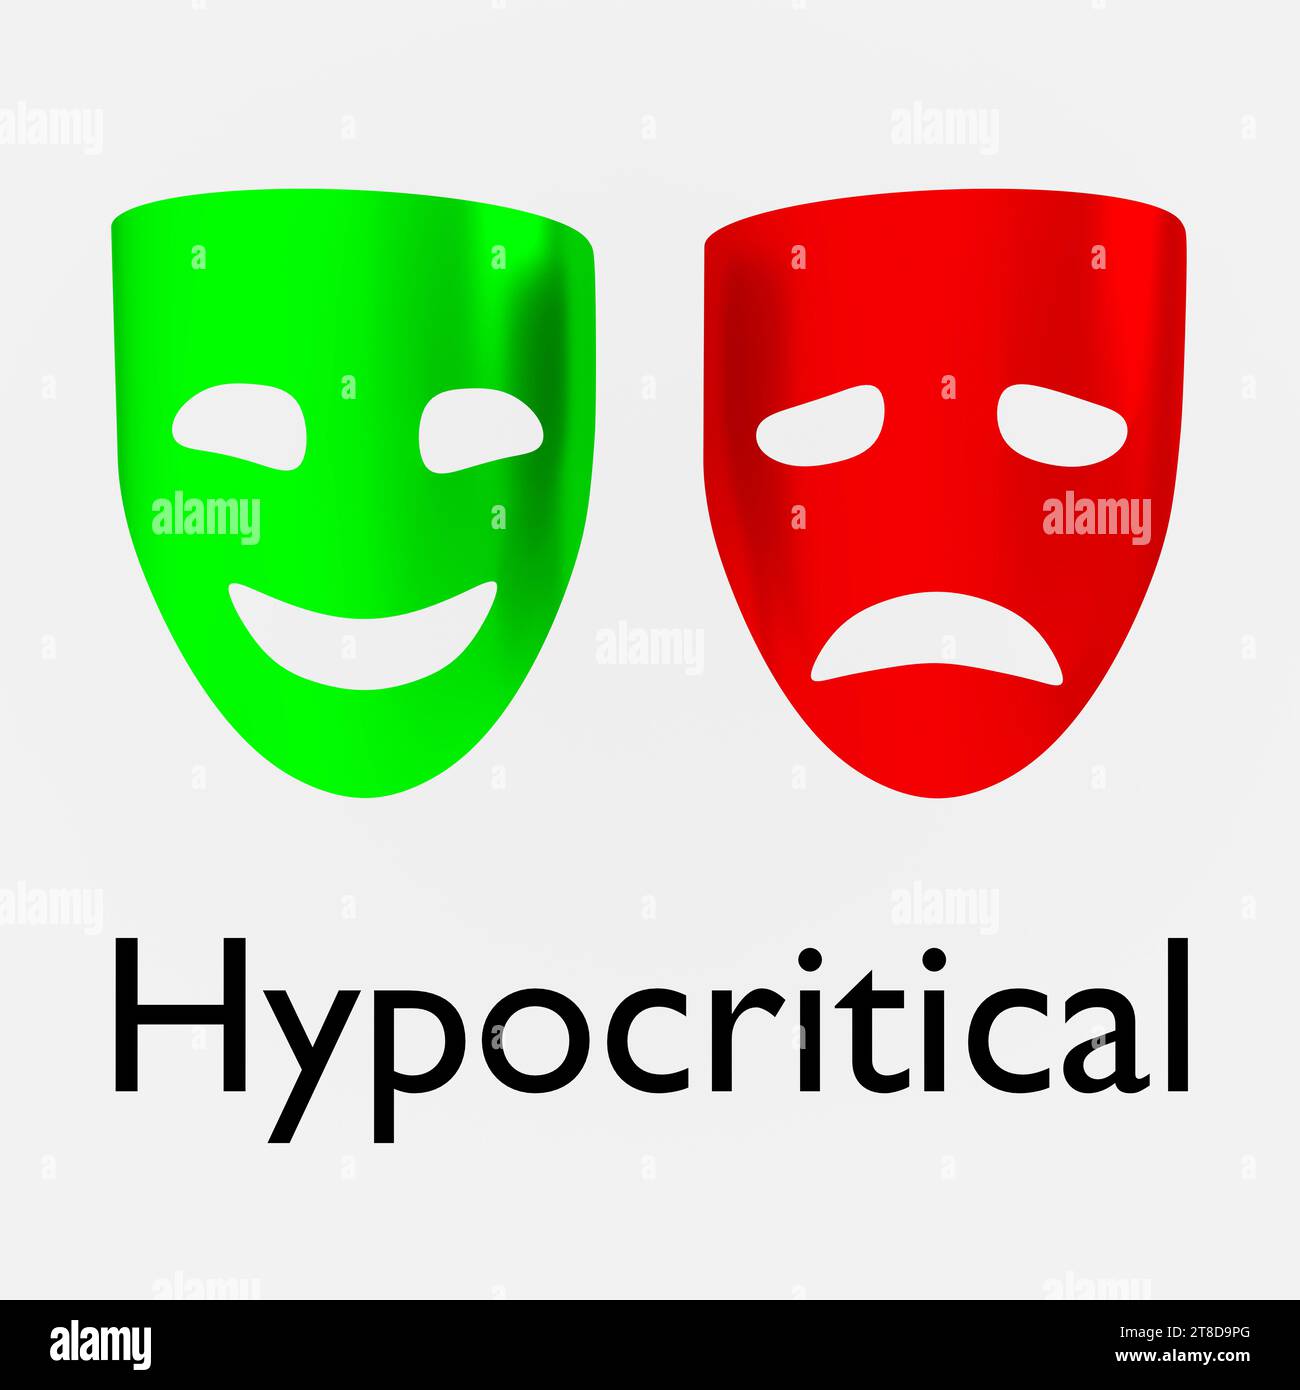 3D illustration of green and red masks, titled as Hypocritical. Stock Photo